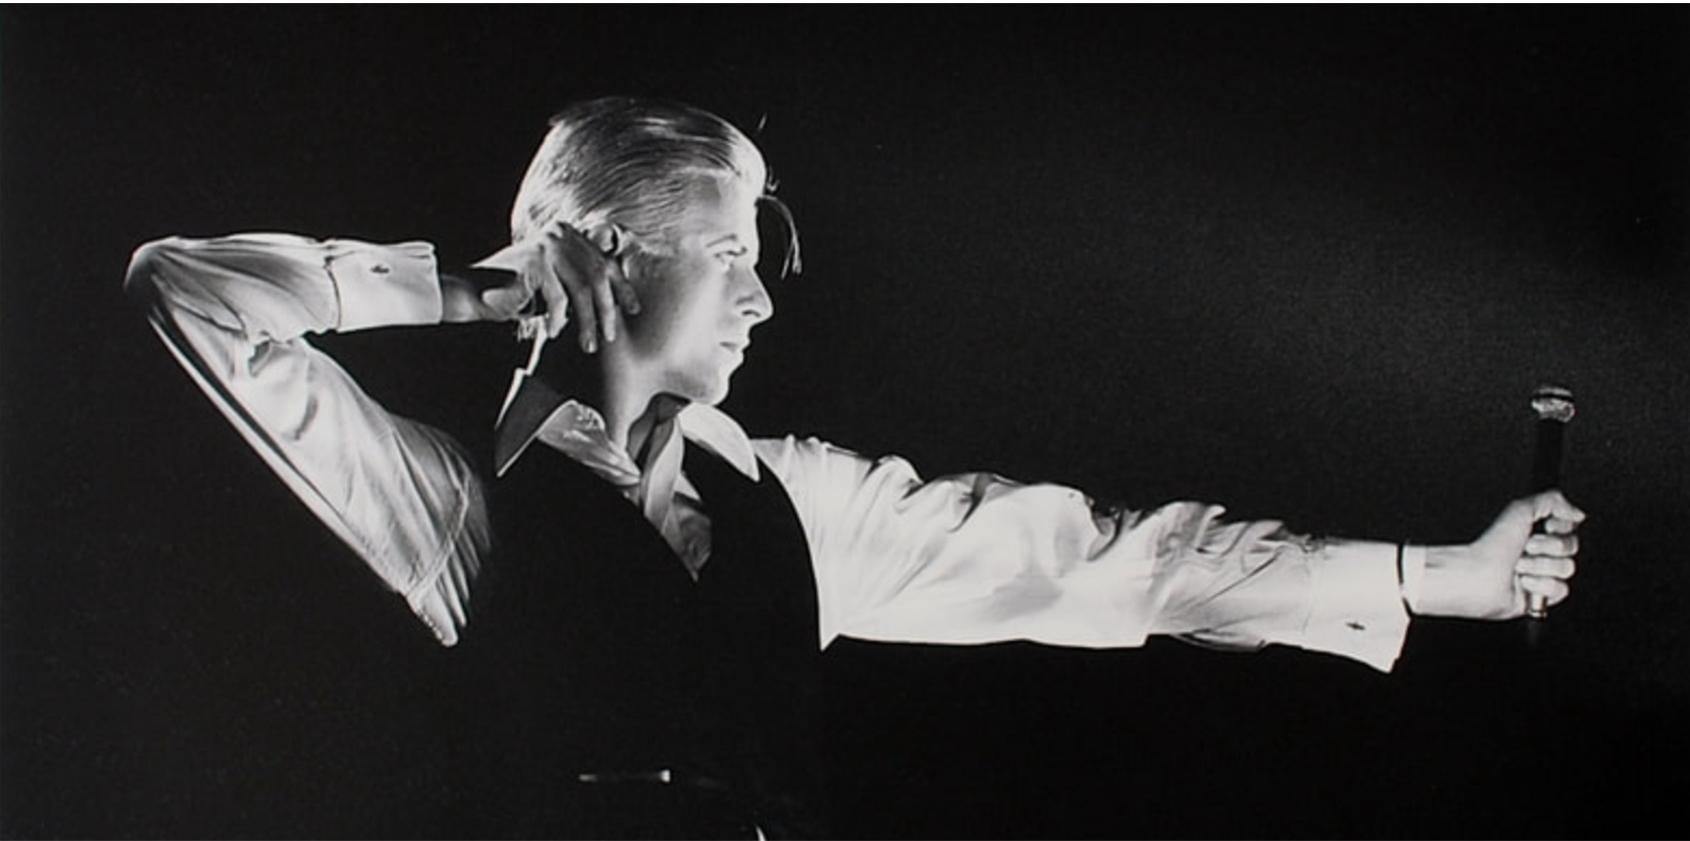 John Rowlands Black and White Photograph - David Bowie The Archer - New special edition 